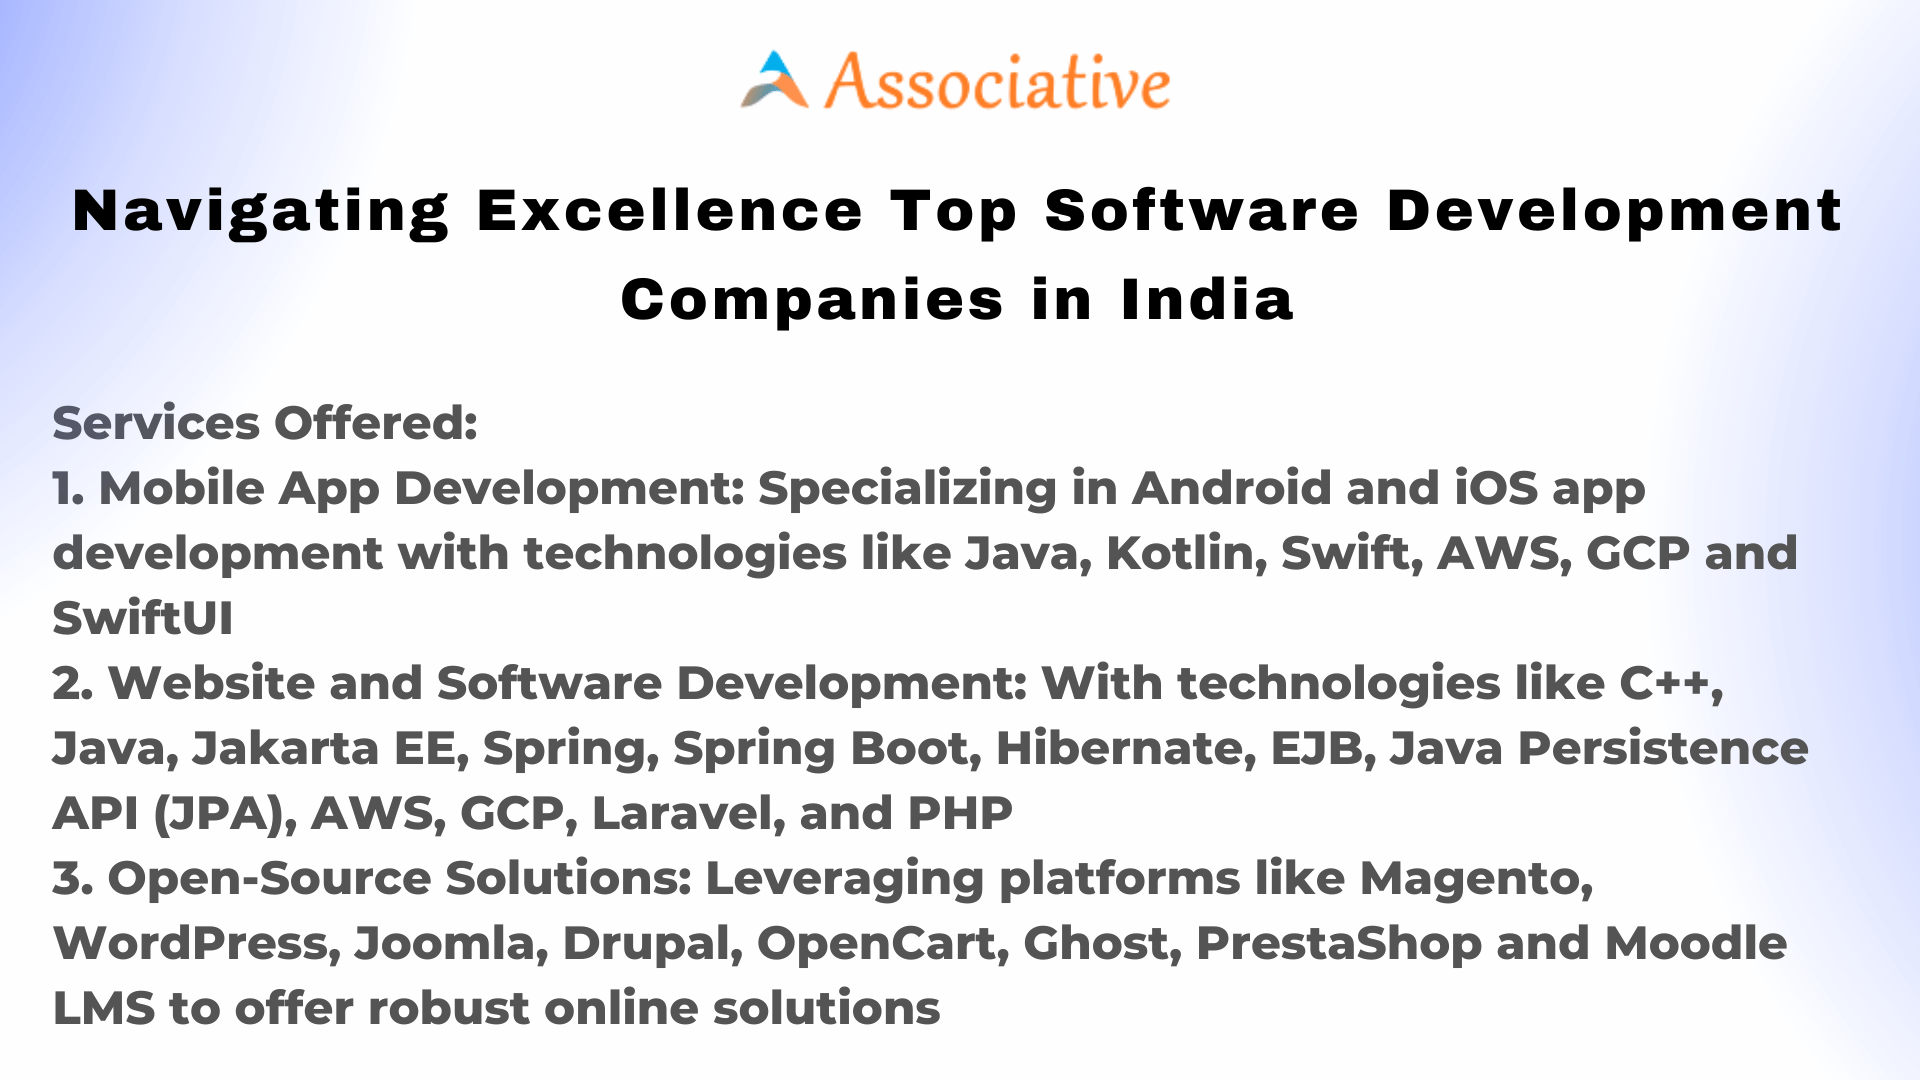 Navigating Excellence Top Software Development Companies in India